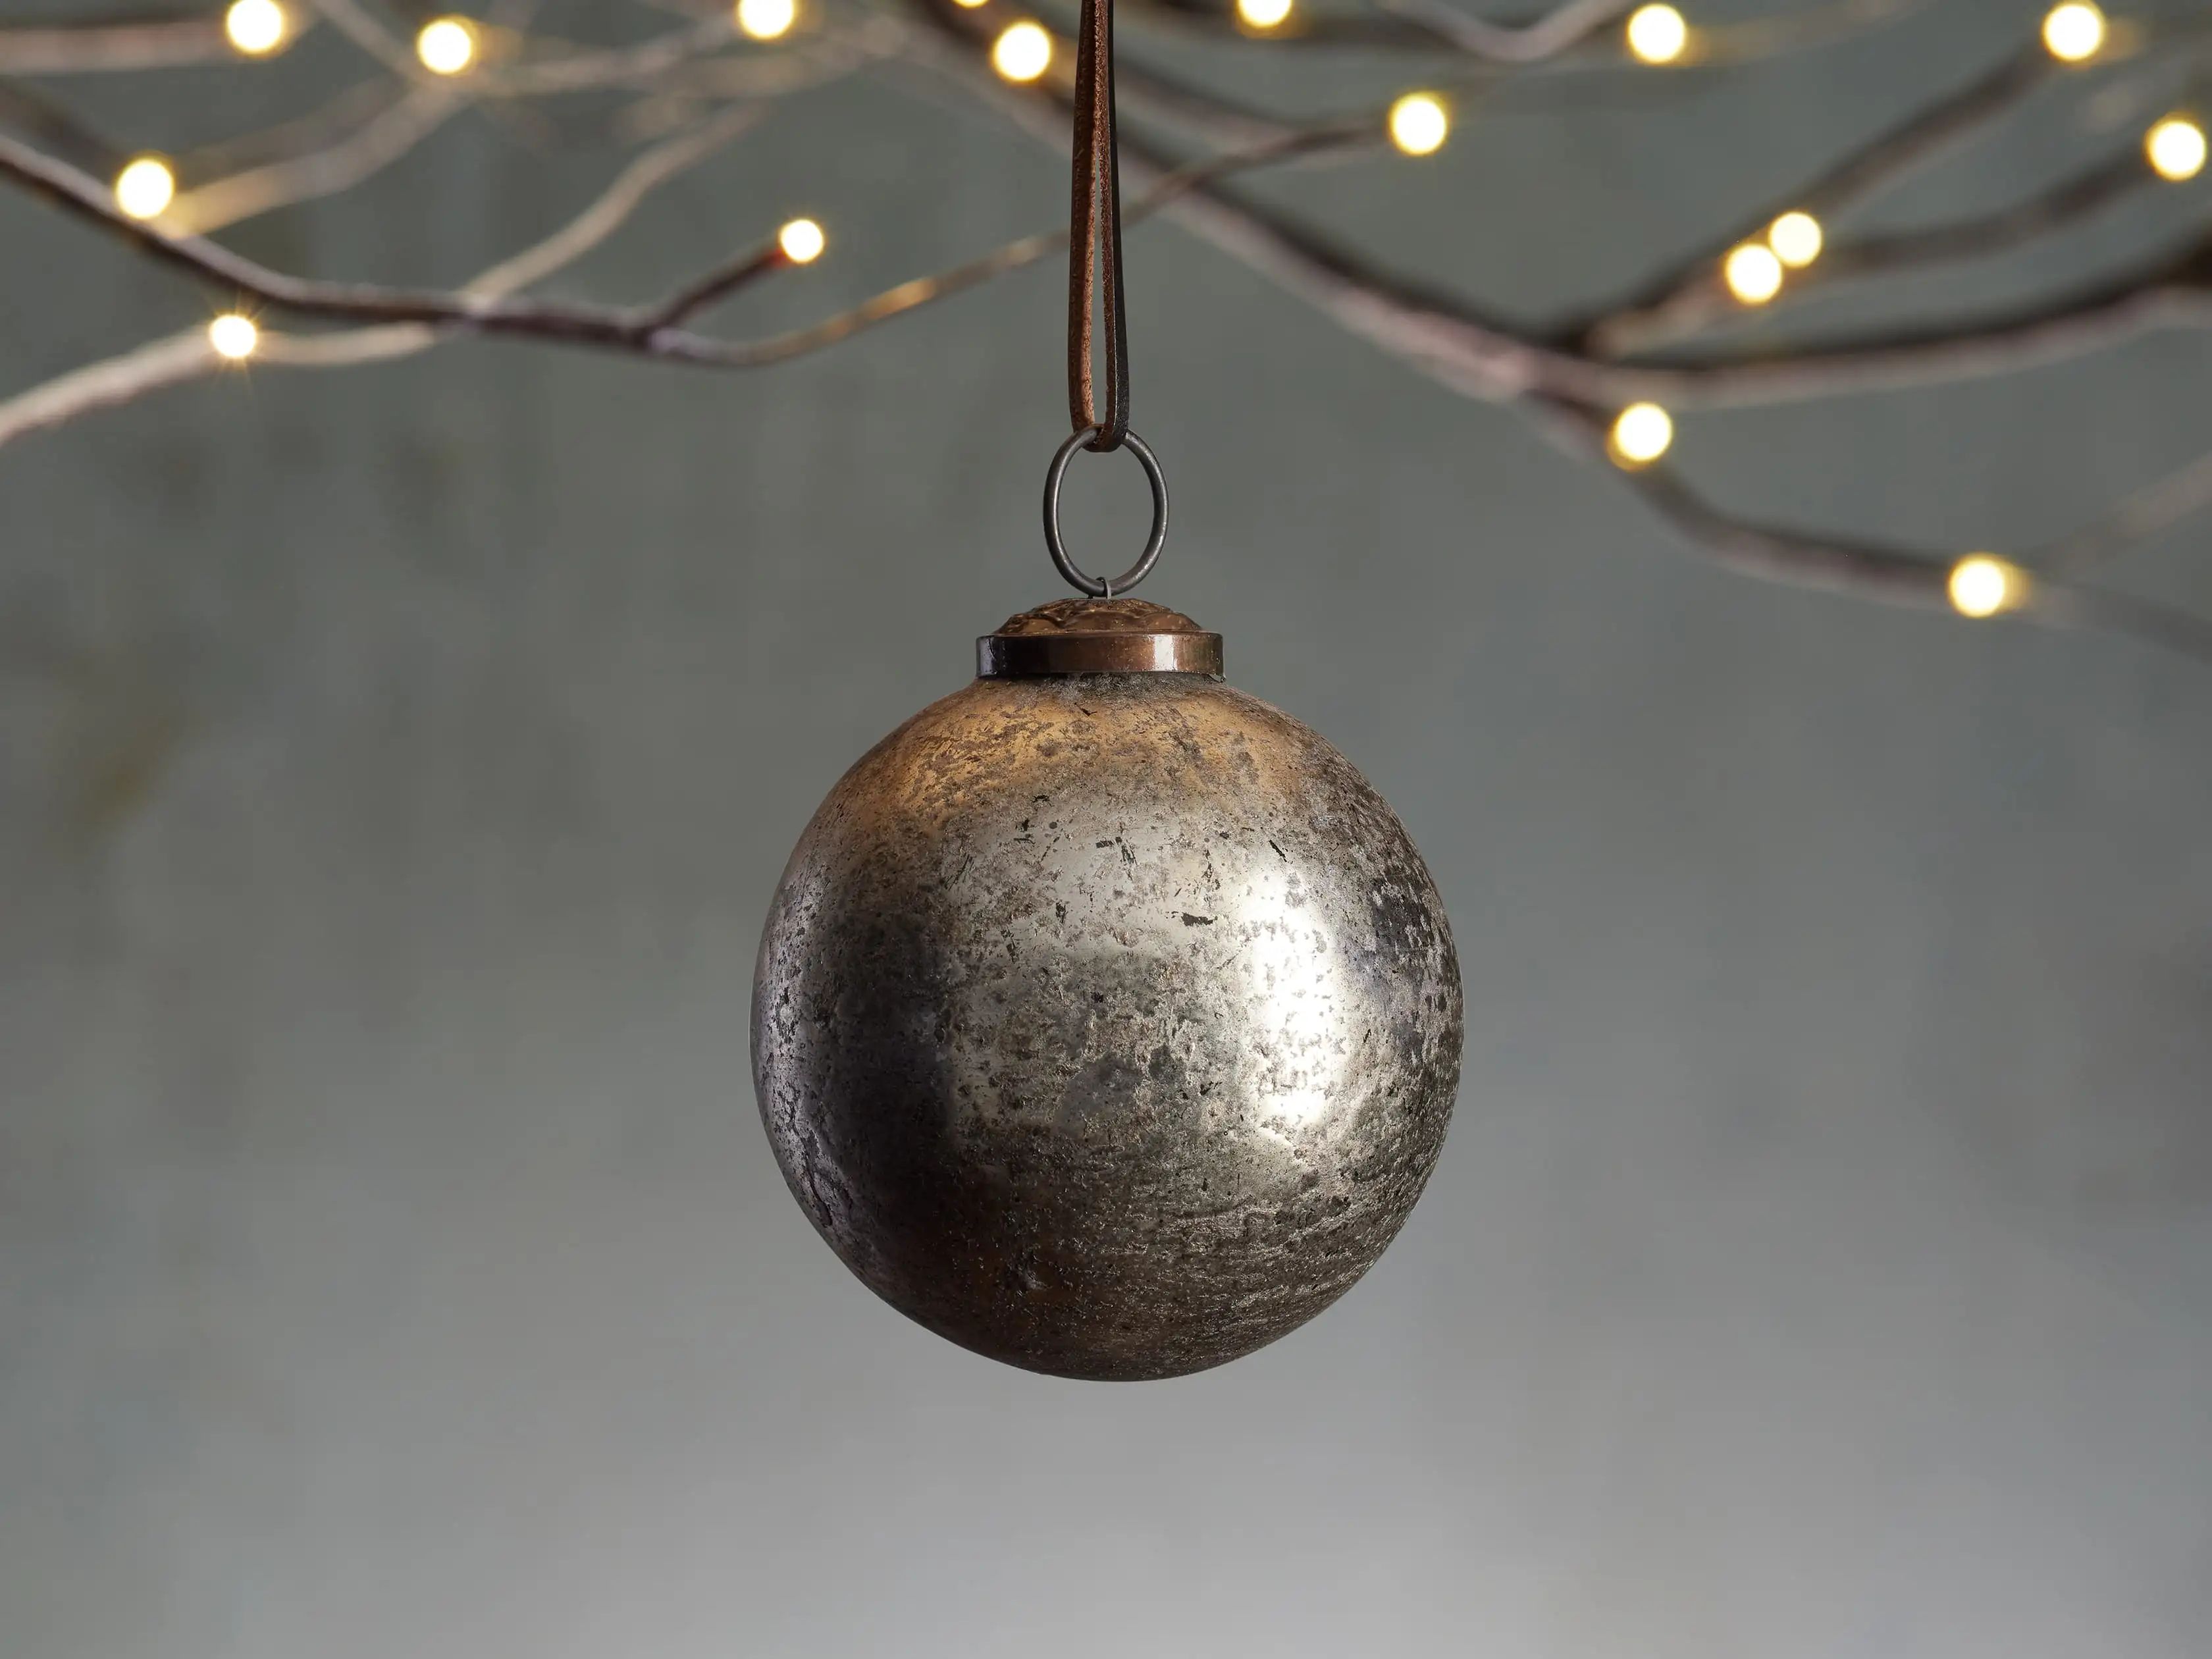 Antique Silver Glass Ornaments (set of 4) | Arhaus